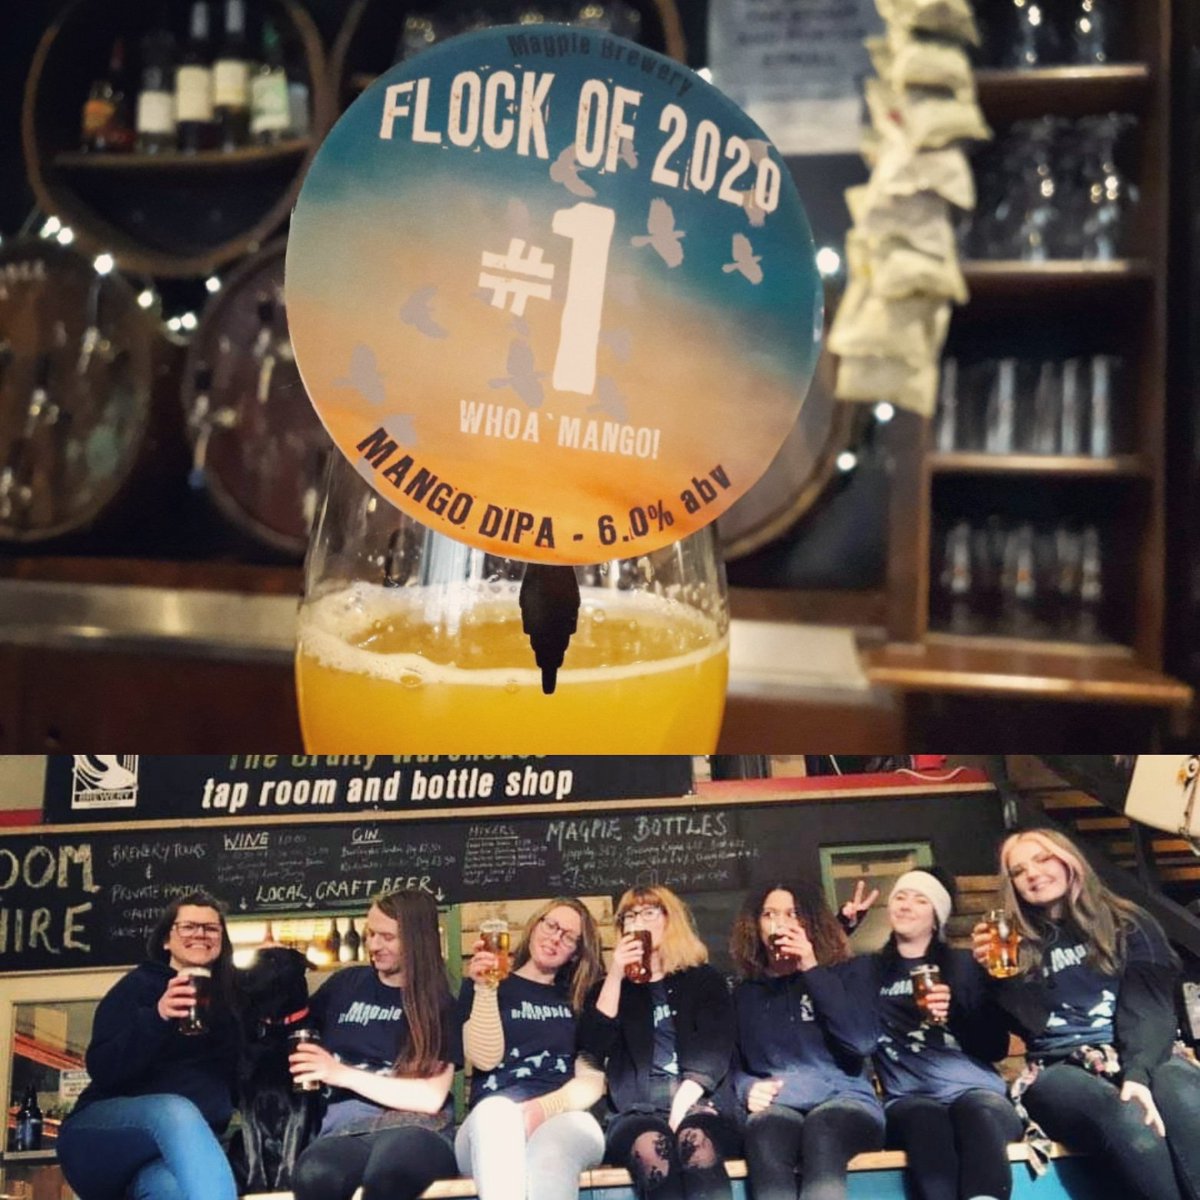 Happy International Womens Day!

To celebrate, now on keg at The Barrel Drop, we have WHOA MANGO! A juicy, hoppy mango DIPA, brewed by the wonderful women of Magpie Brewery and pubs 🍻
#InternationalWomensDay #InternationalWomenDay2020 #craftbeer #WomenWhoBrew